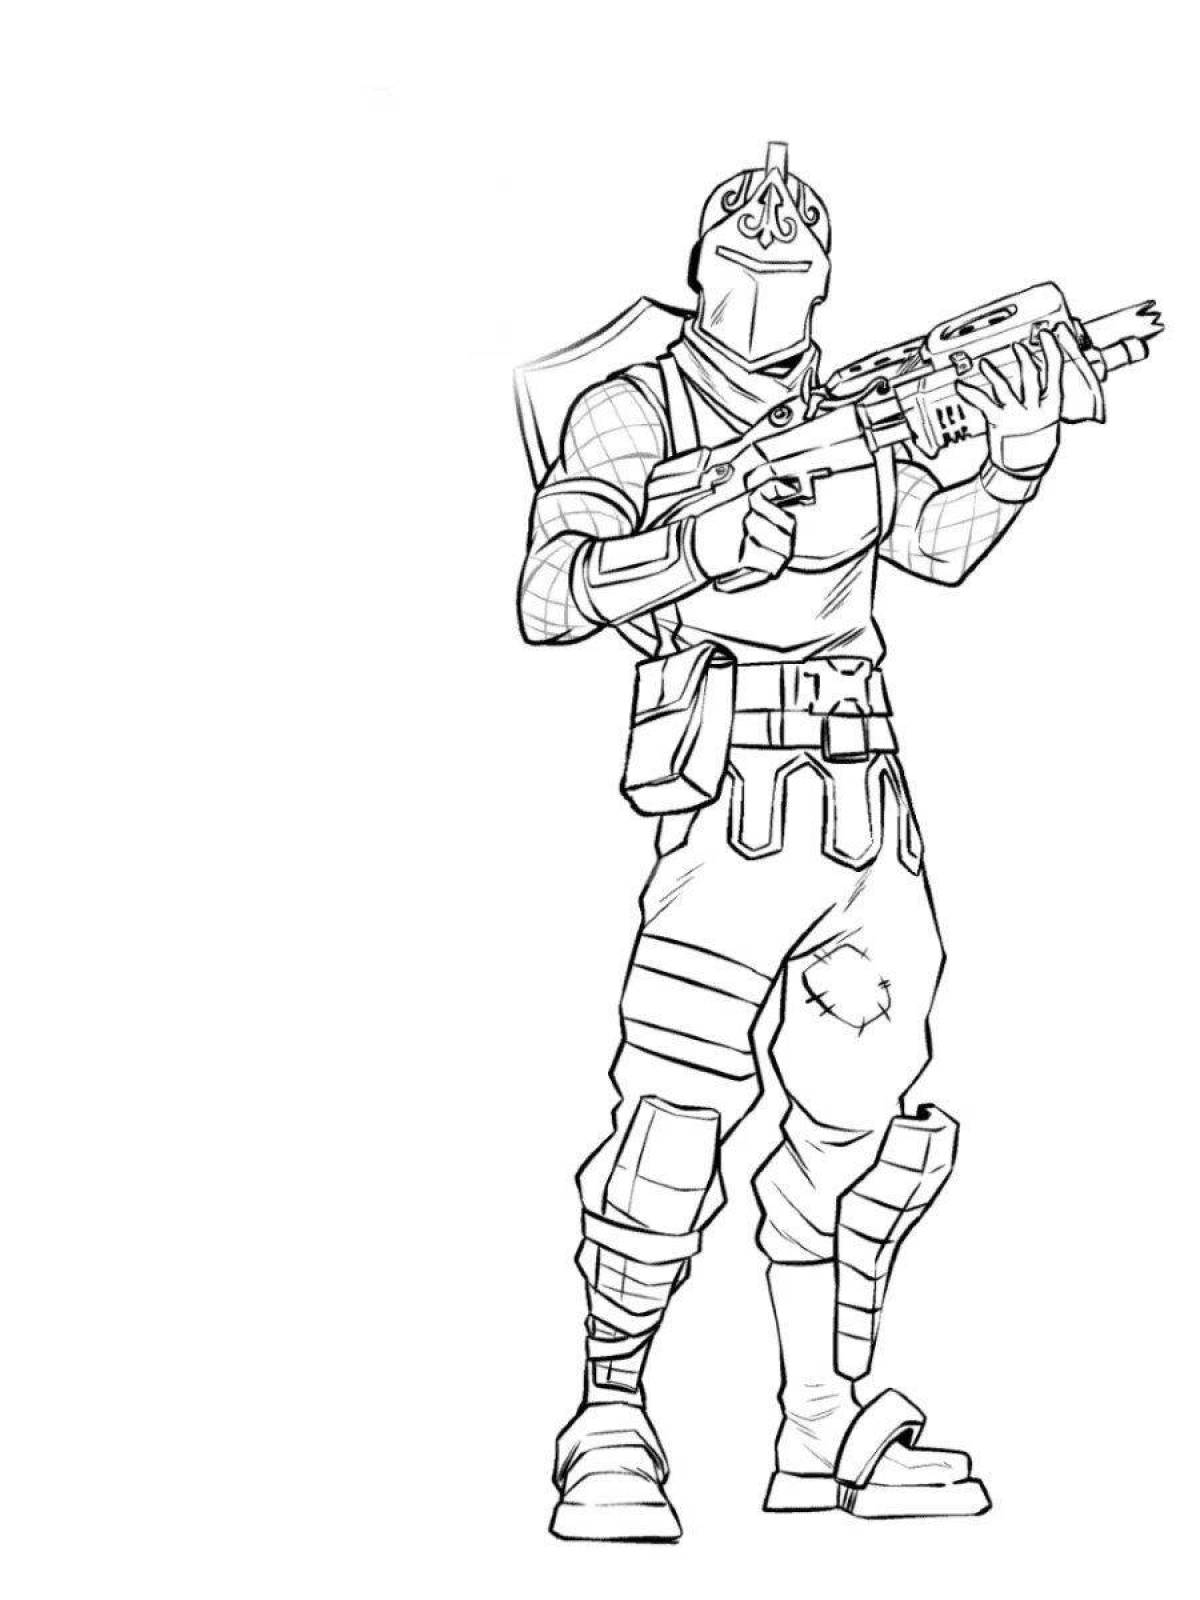 Awesome ford knight coloring page